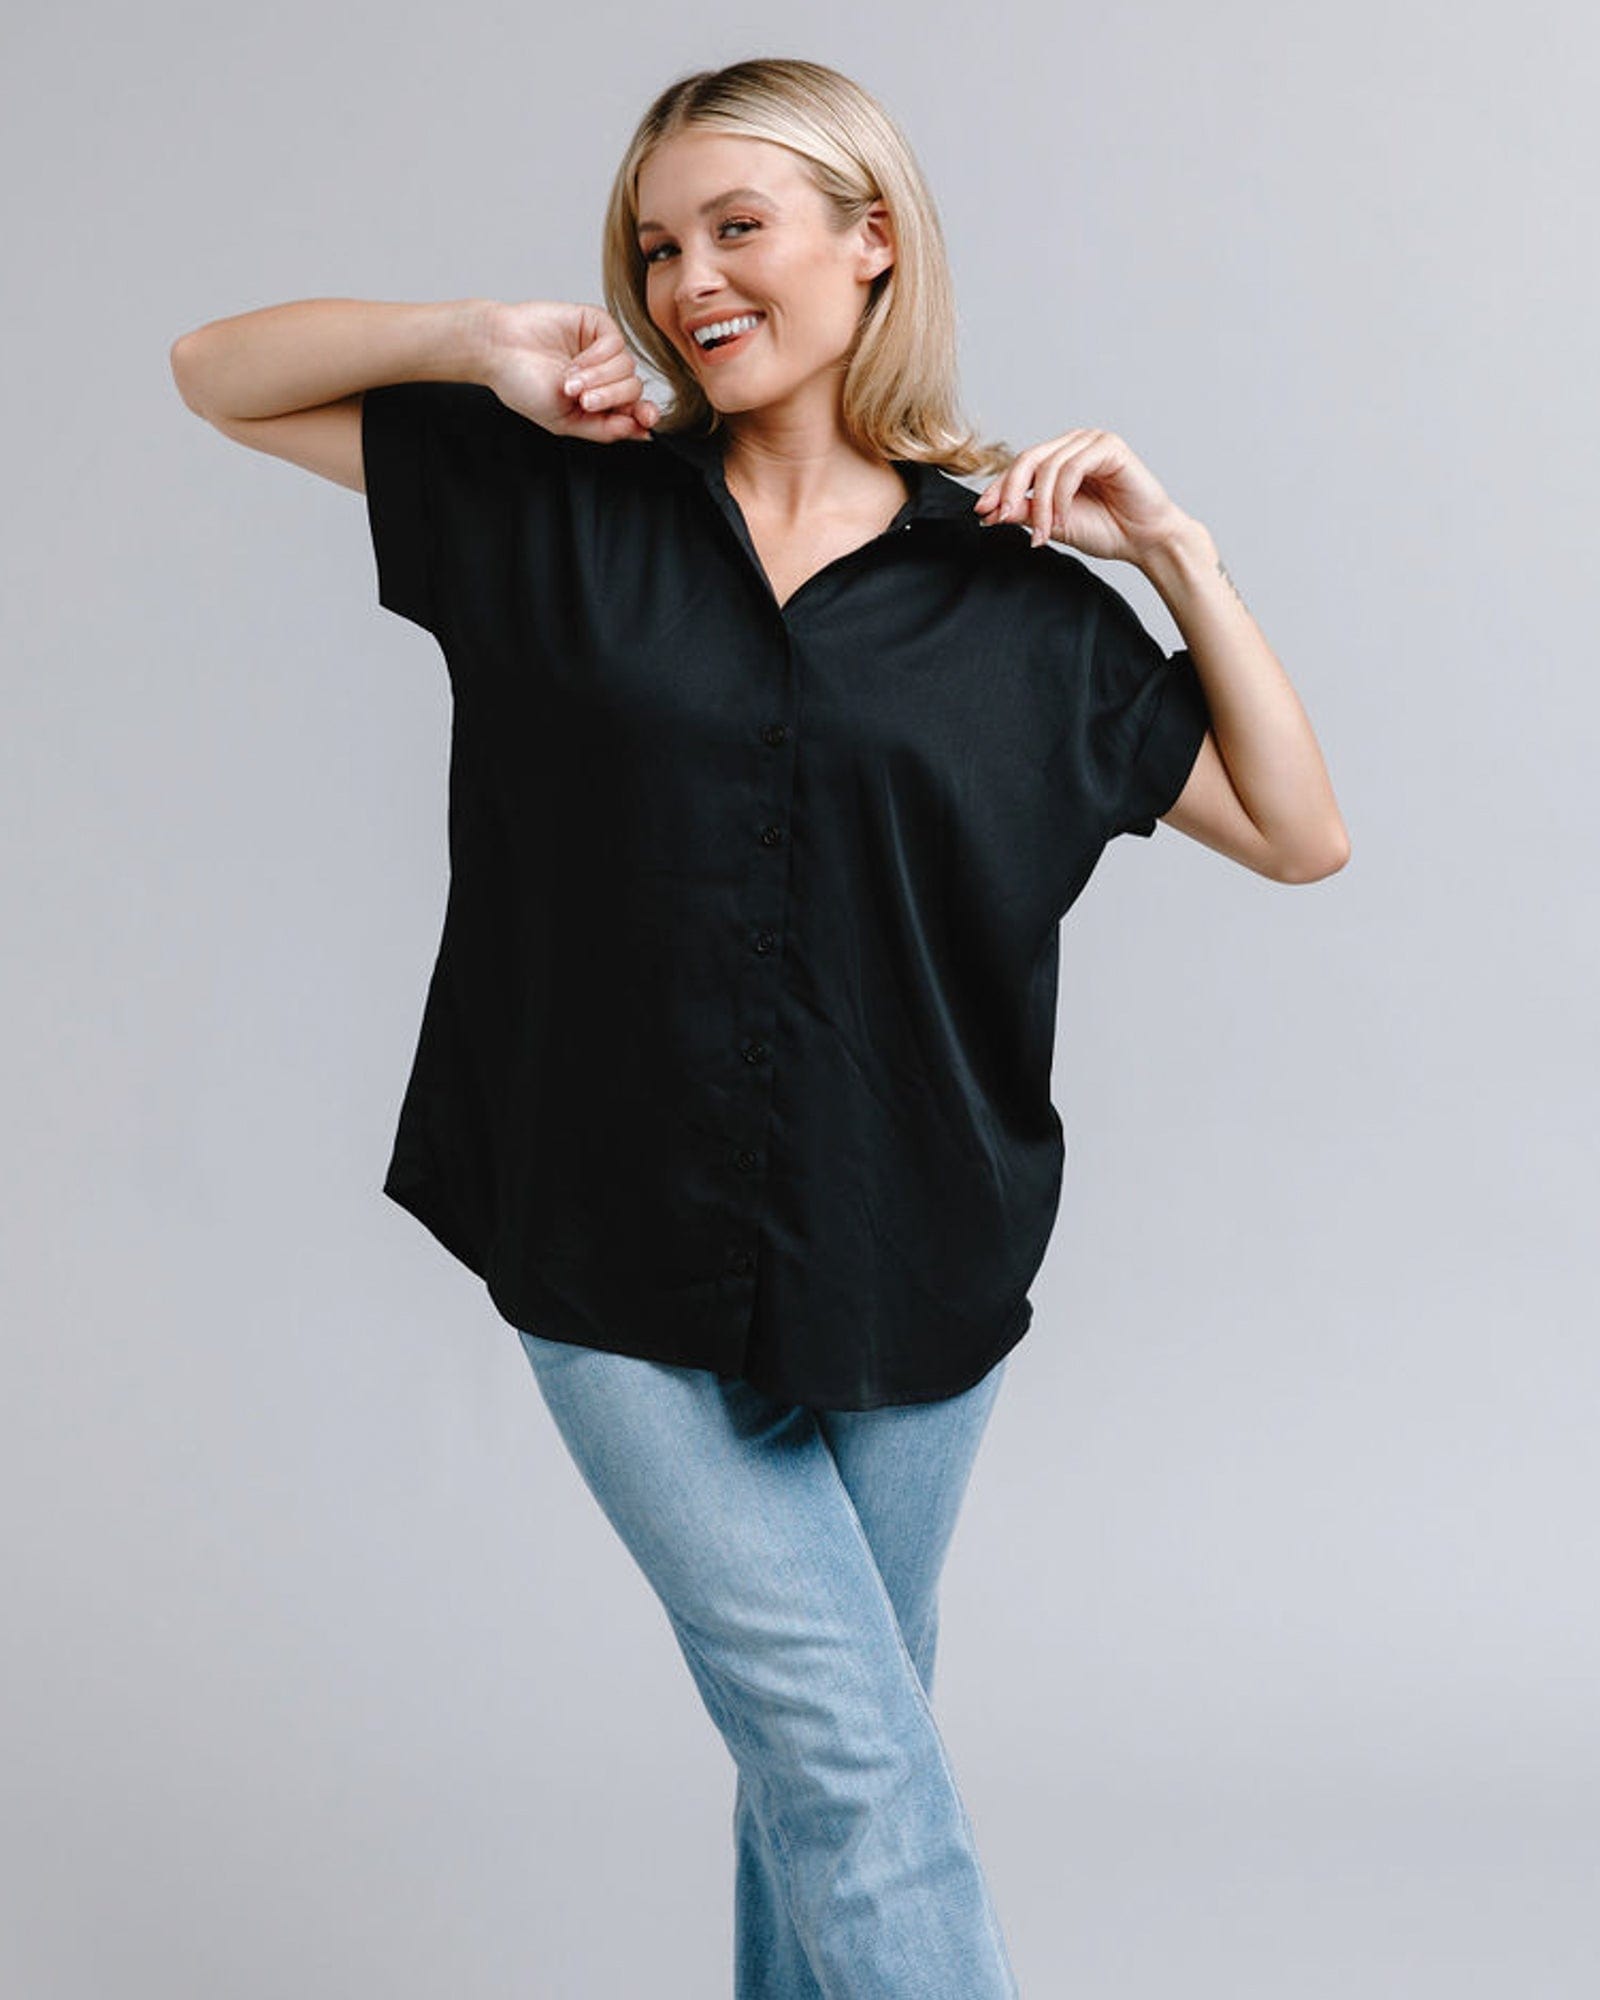 Woman in a short sleeve, collared, loose fitting black top